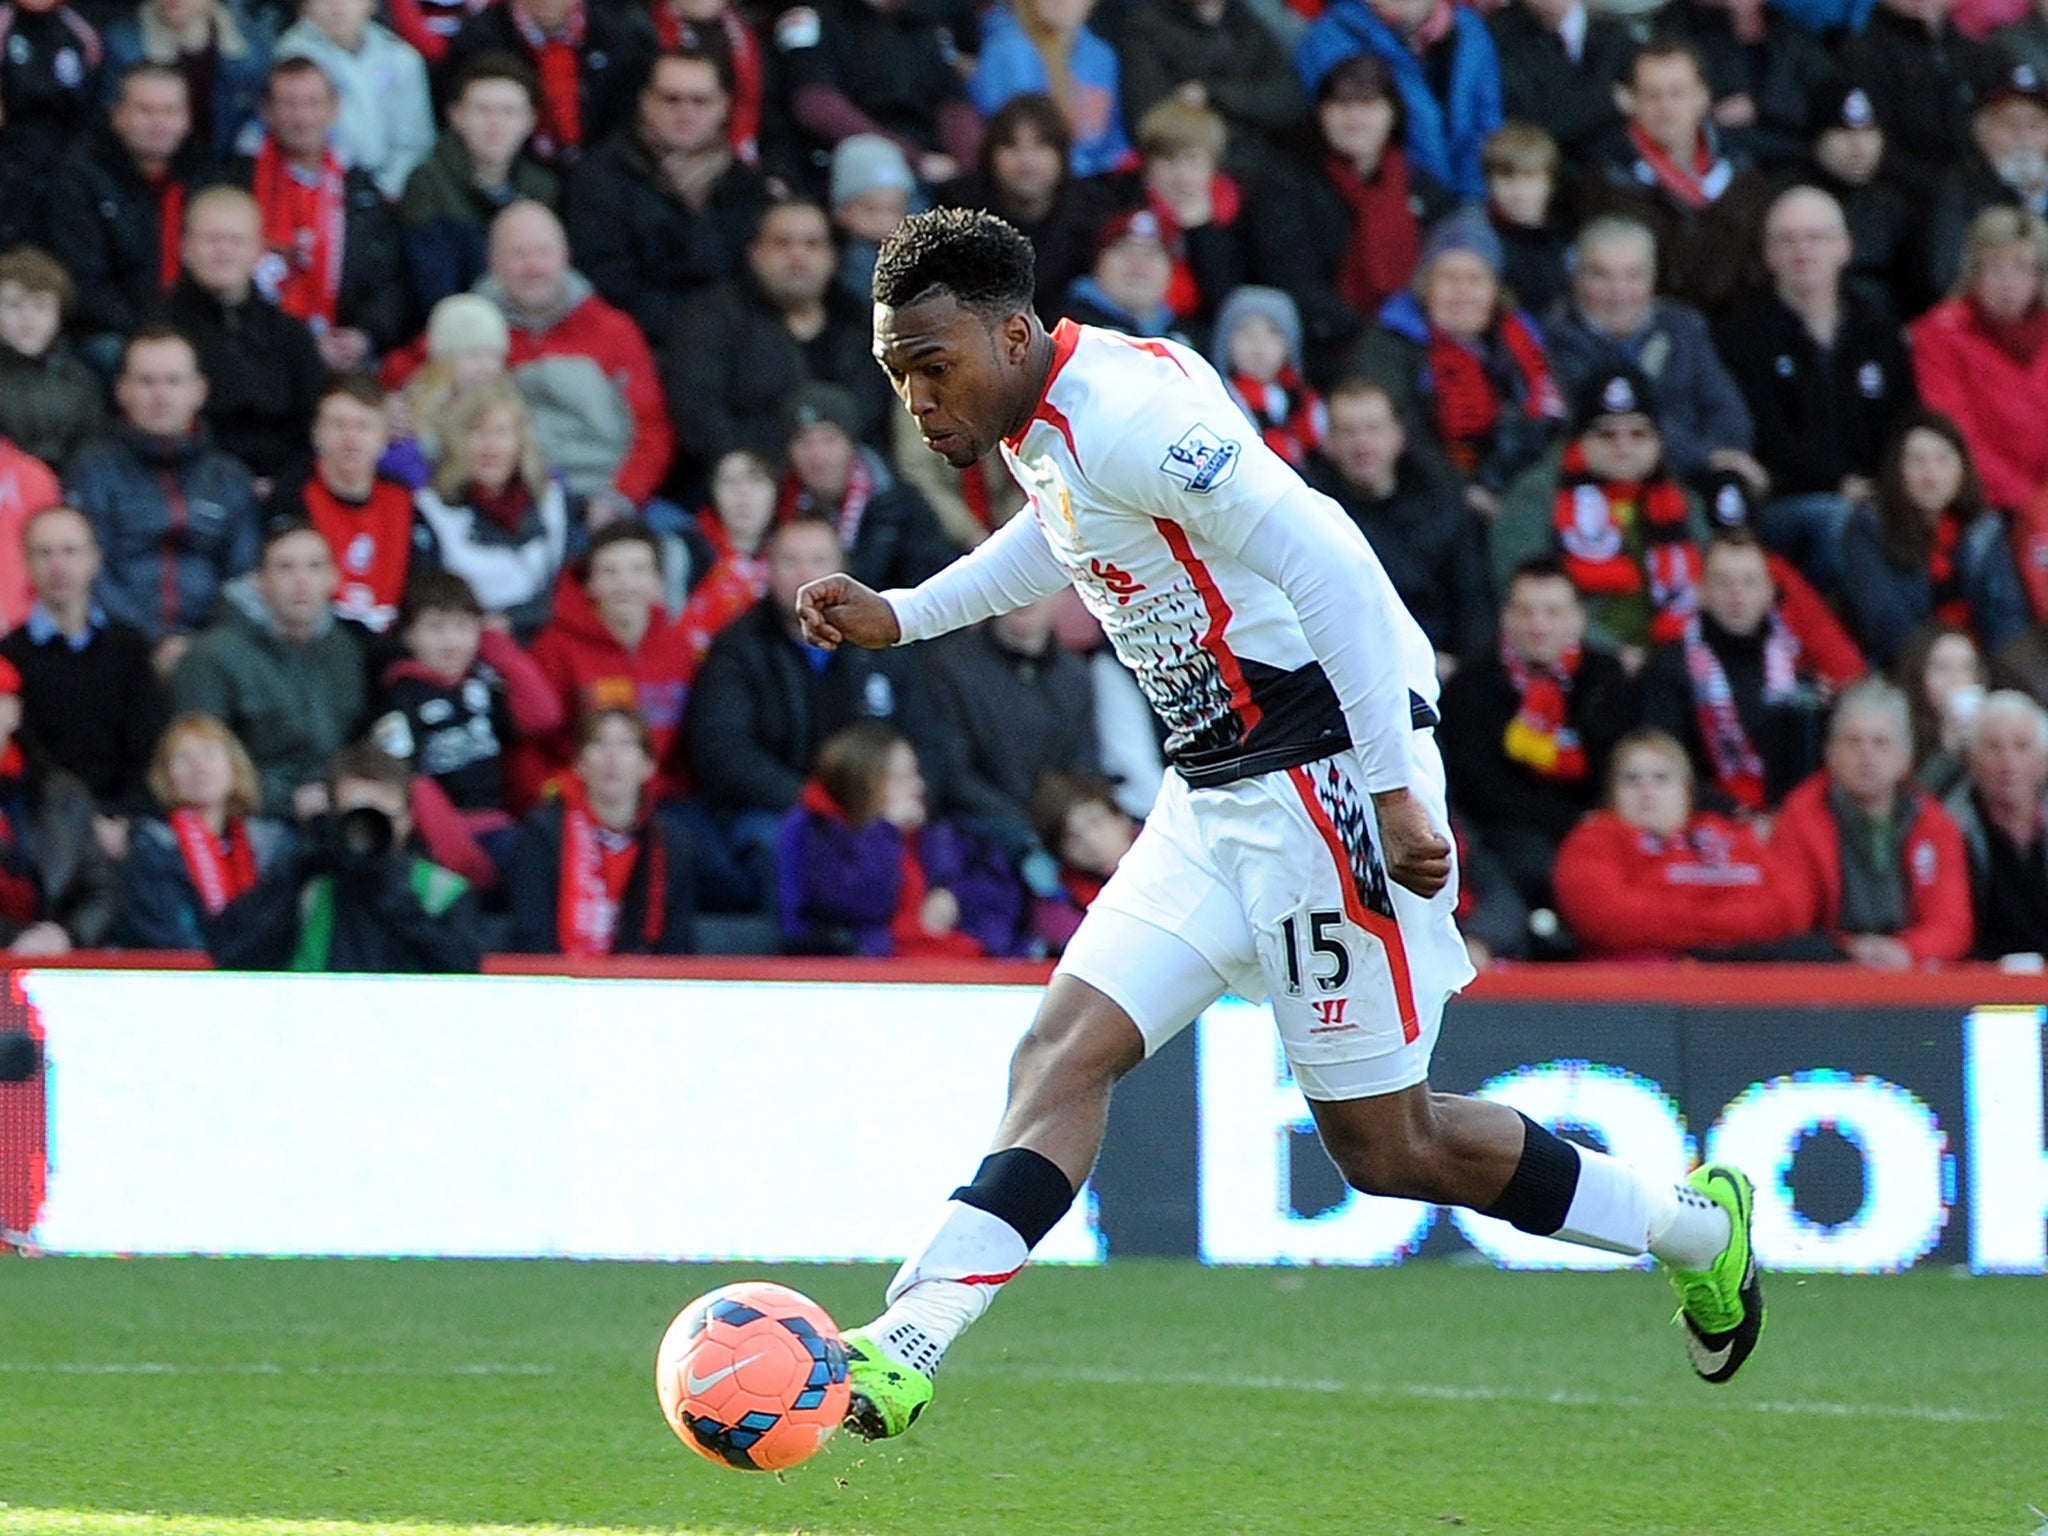 Daniel Sturridge scores for Liverpool in the 2-0 FA Cup victory over Bournemouth